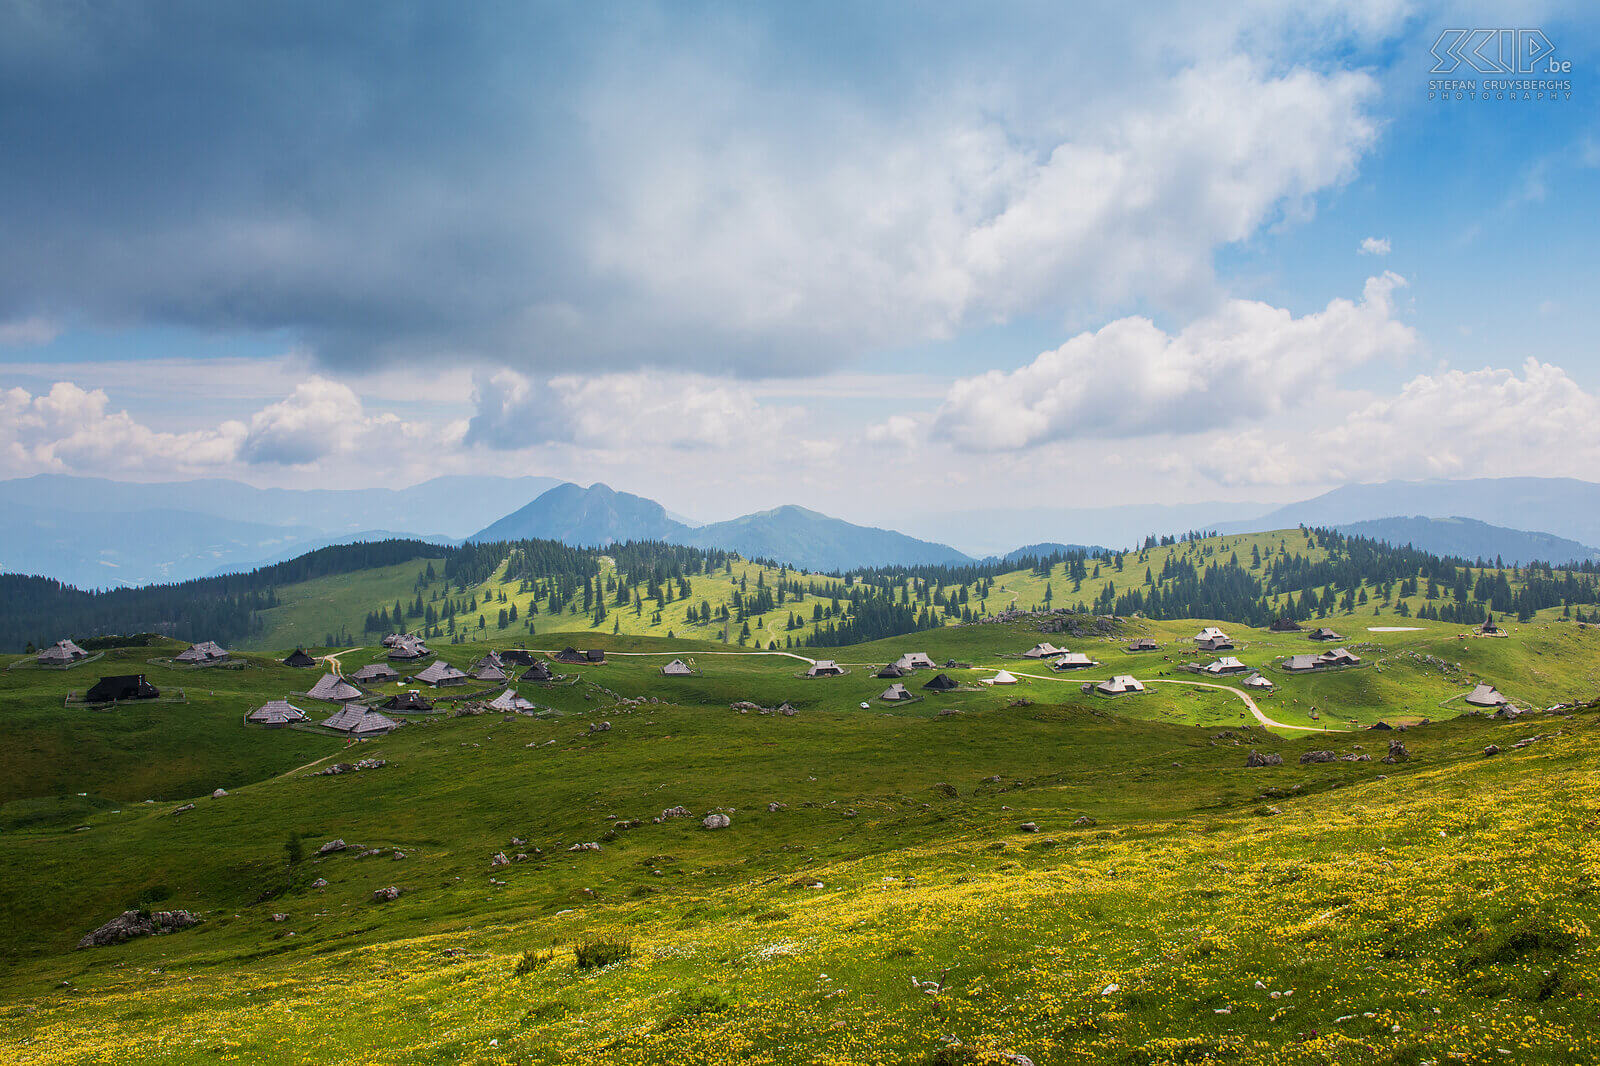 Velika Planina One of the most magical places in Slovenia is the Velika Planina plateau. The shepherd's village with its identical wooden buildings is located on a rolling green meadow at 1600 meters above sea level. Stefan Cruysberghs